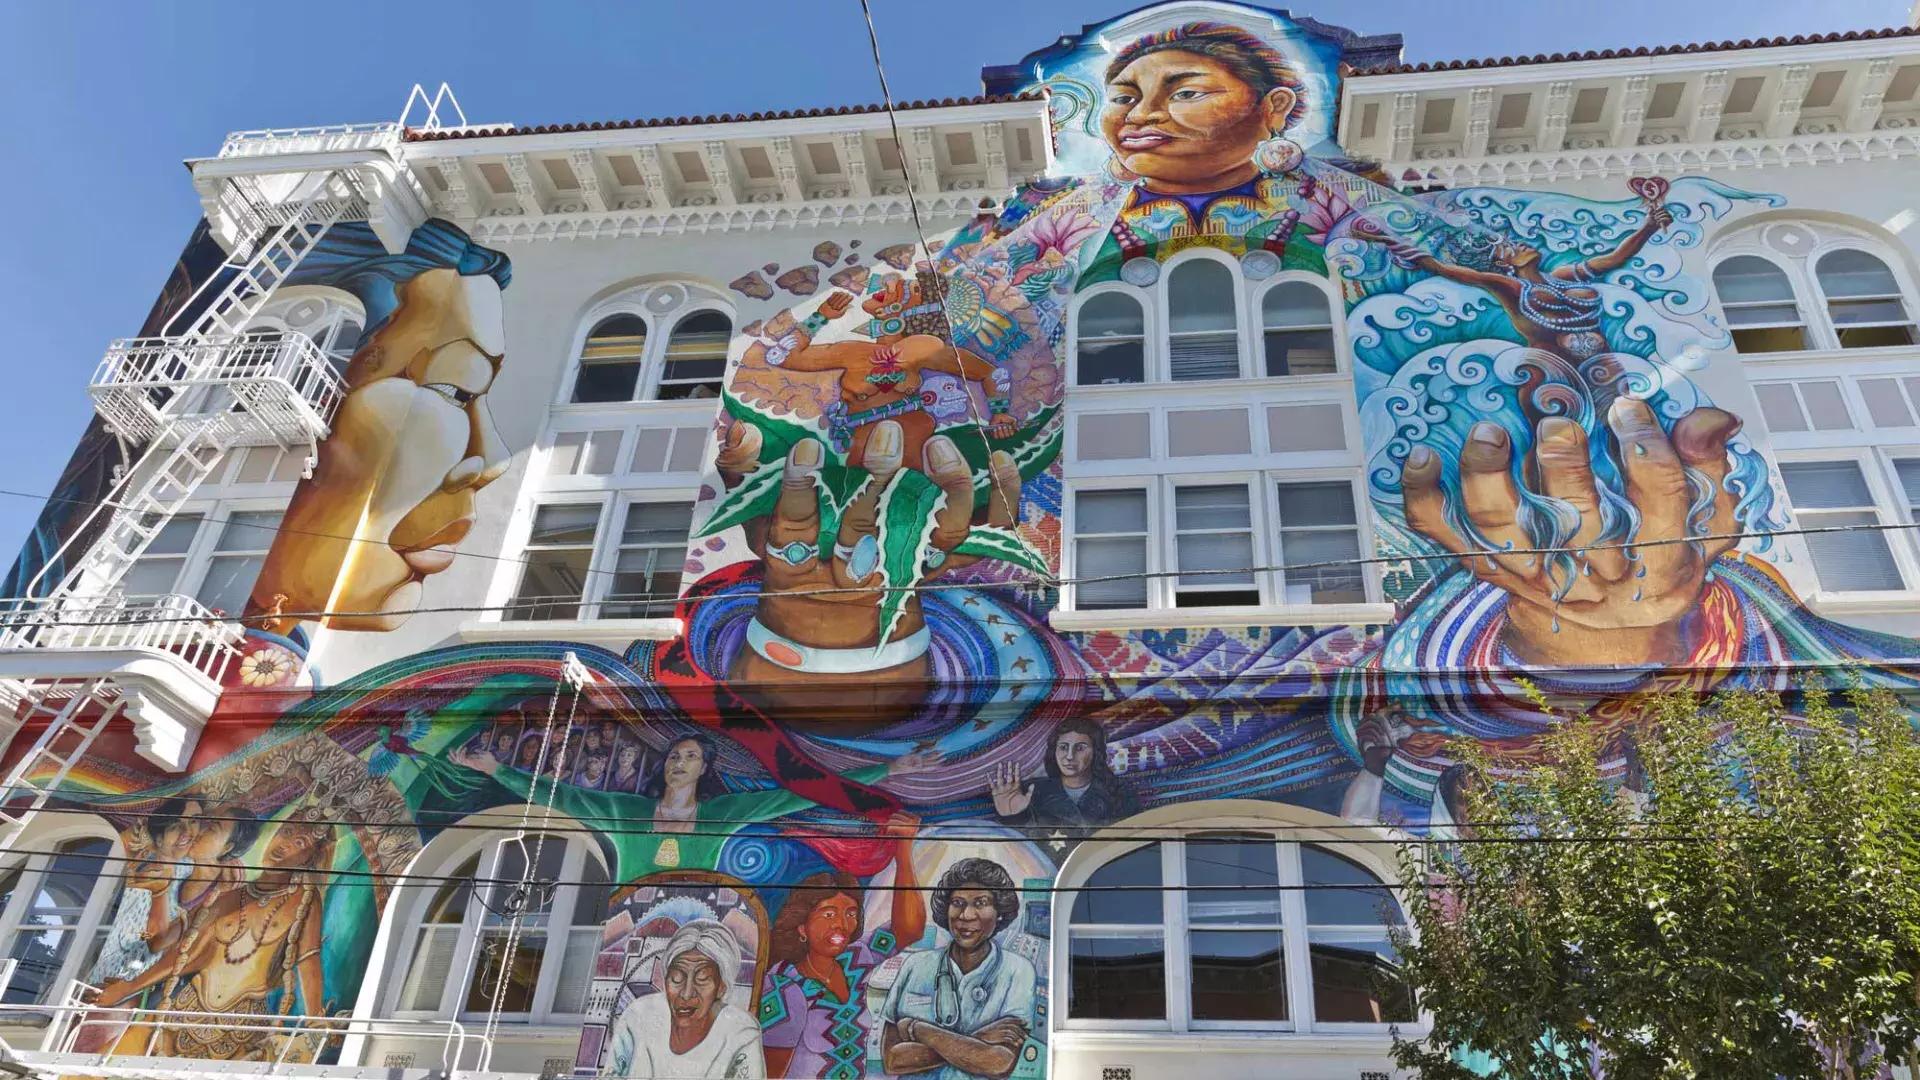 A colorful, large-scale mural covers the side of the Women's Building in San Francisco's Mission District.